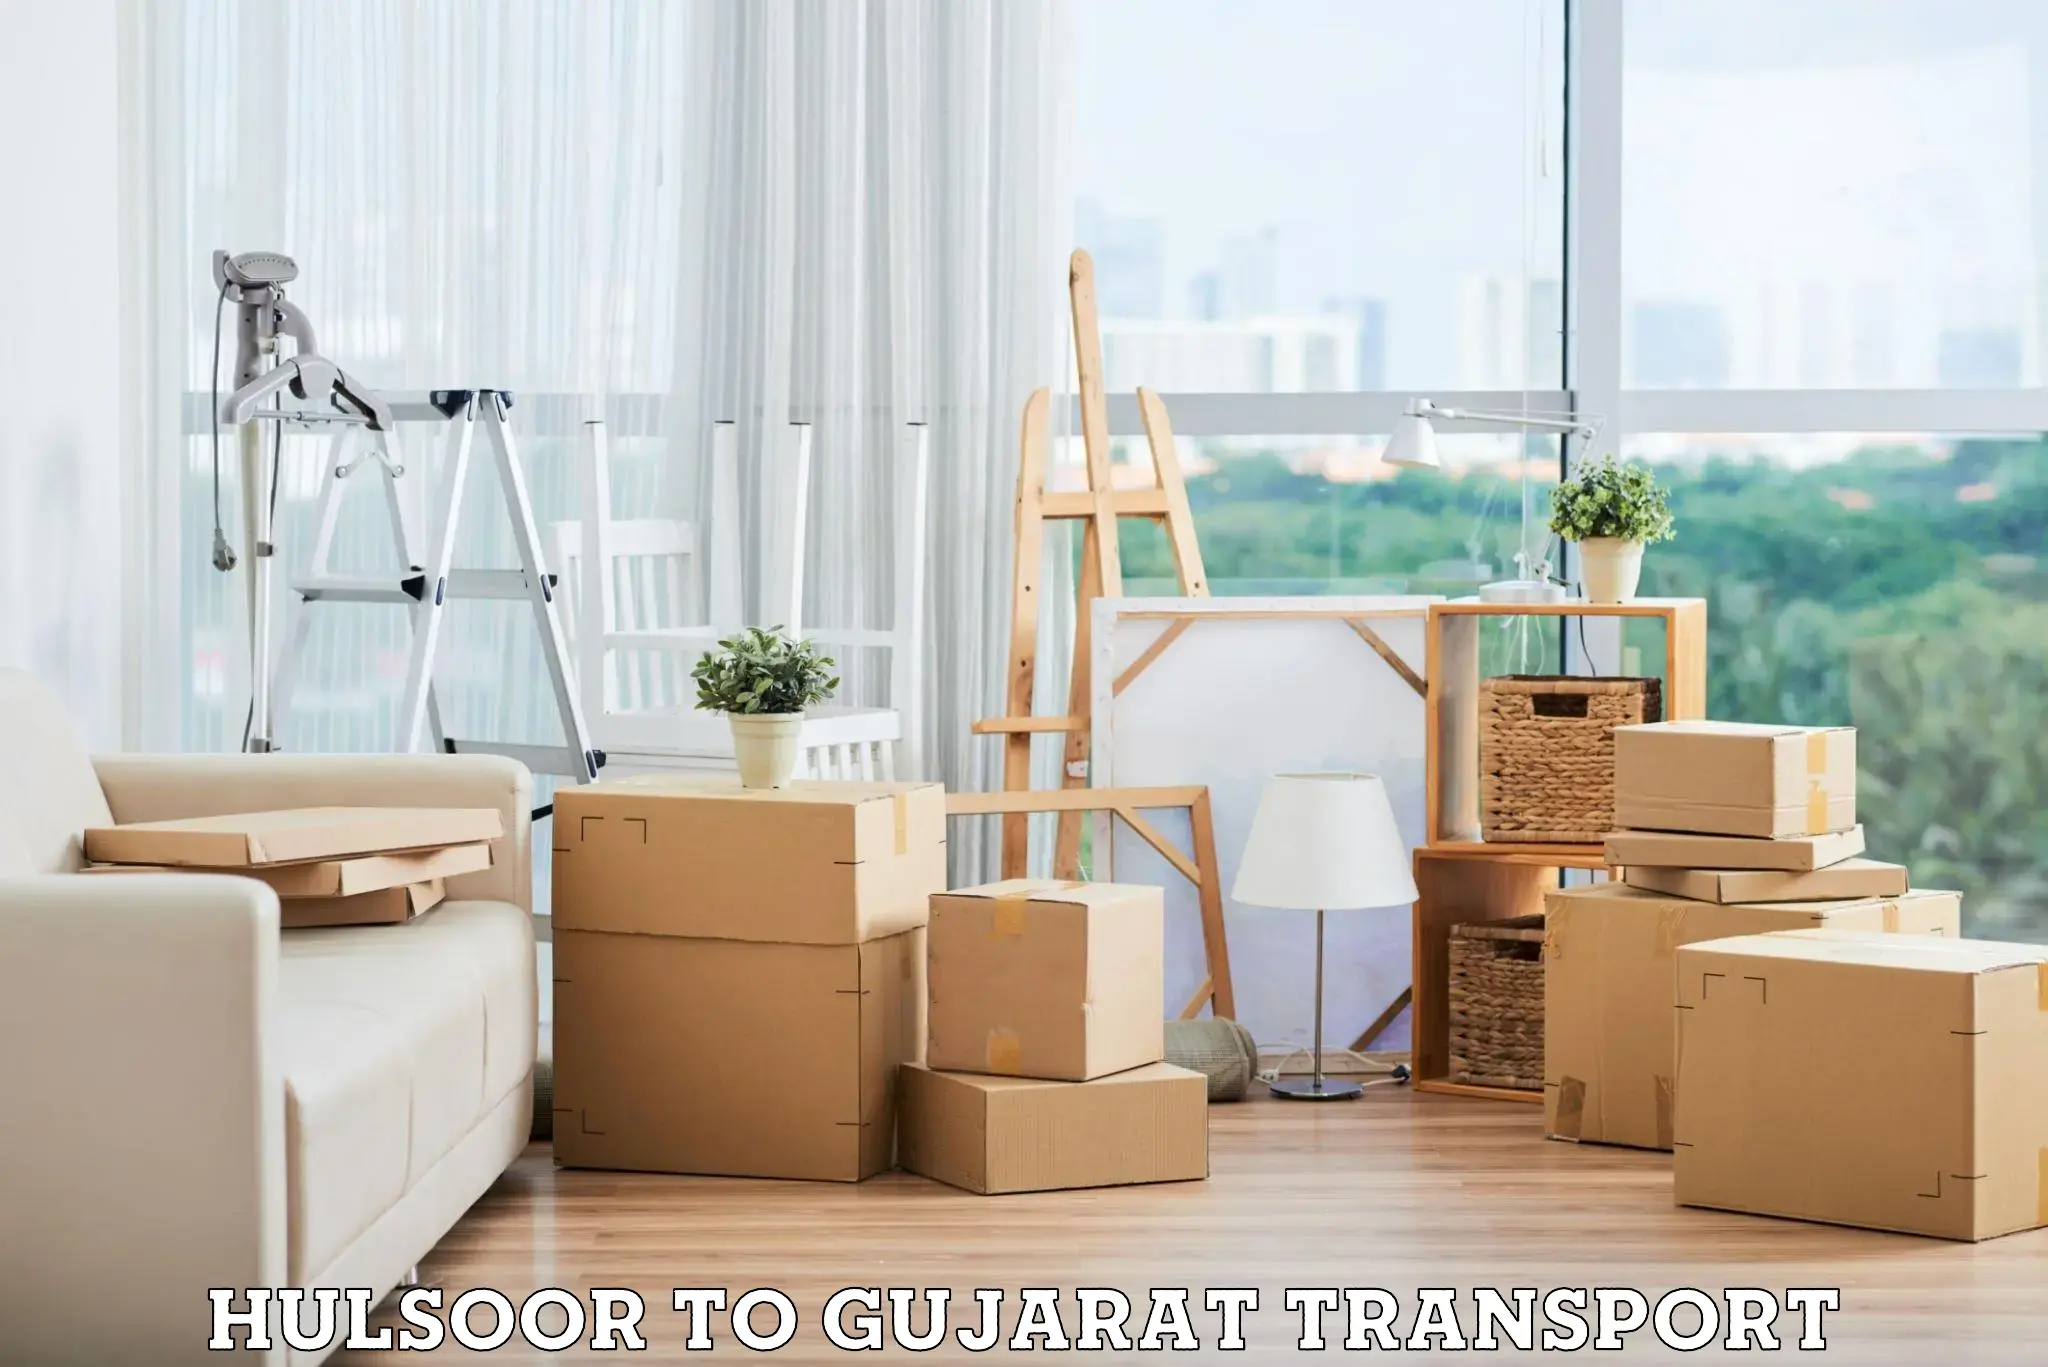 Container transport service Hulsoor to Jetpur